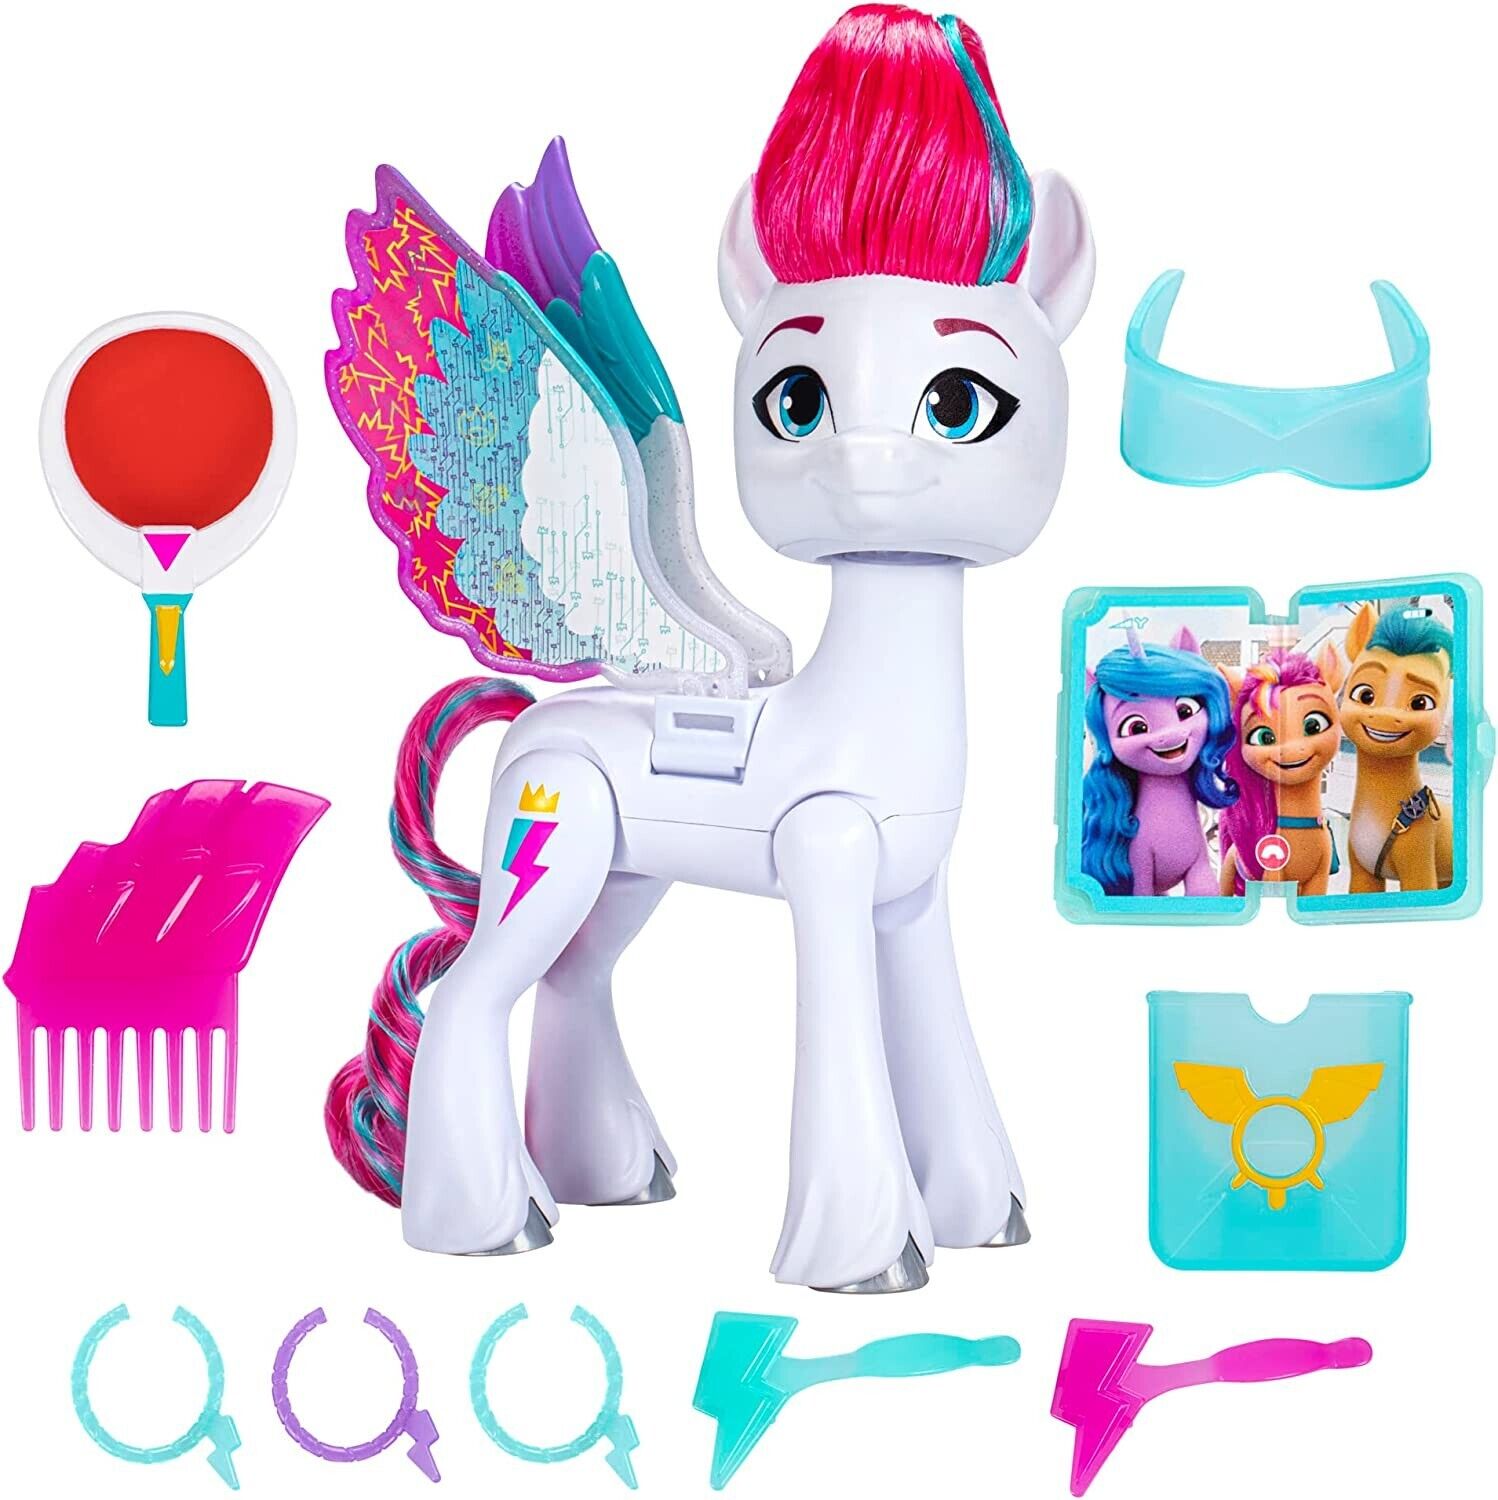 My Little Pony Toys Zipp Storm Wing Surprise Fashion Doll with Wings and Acc.